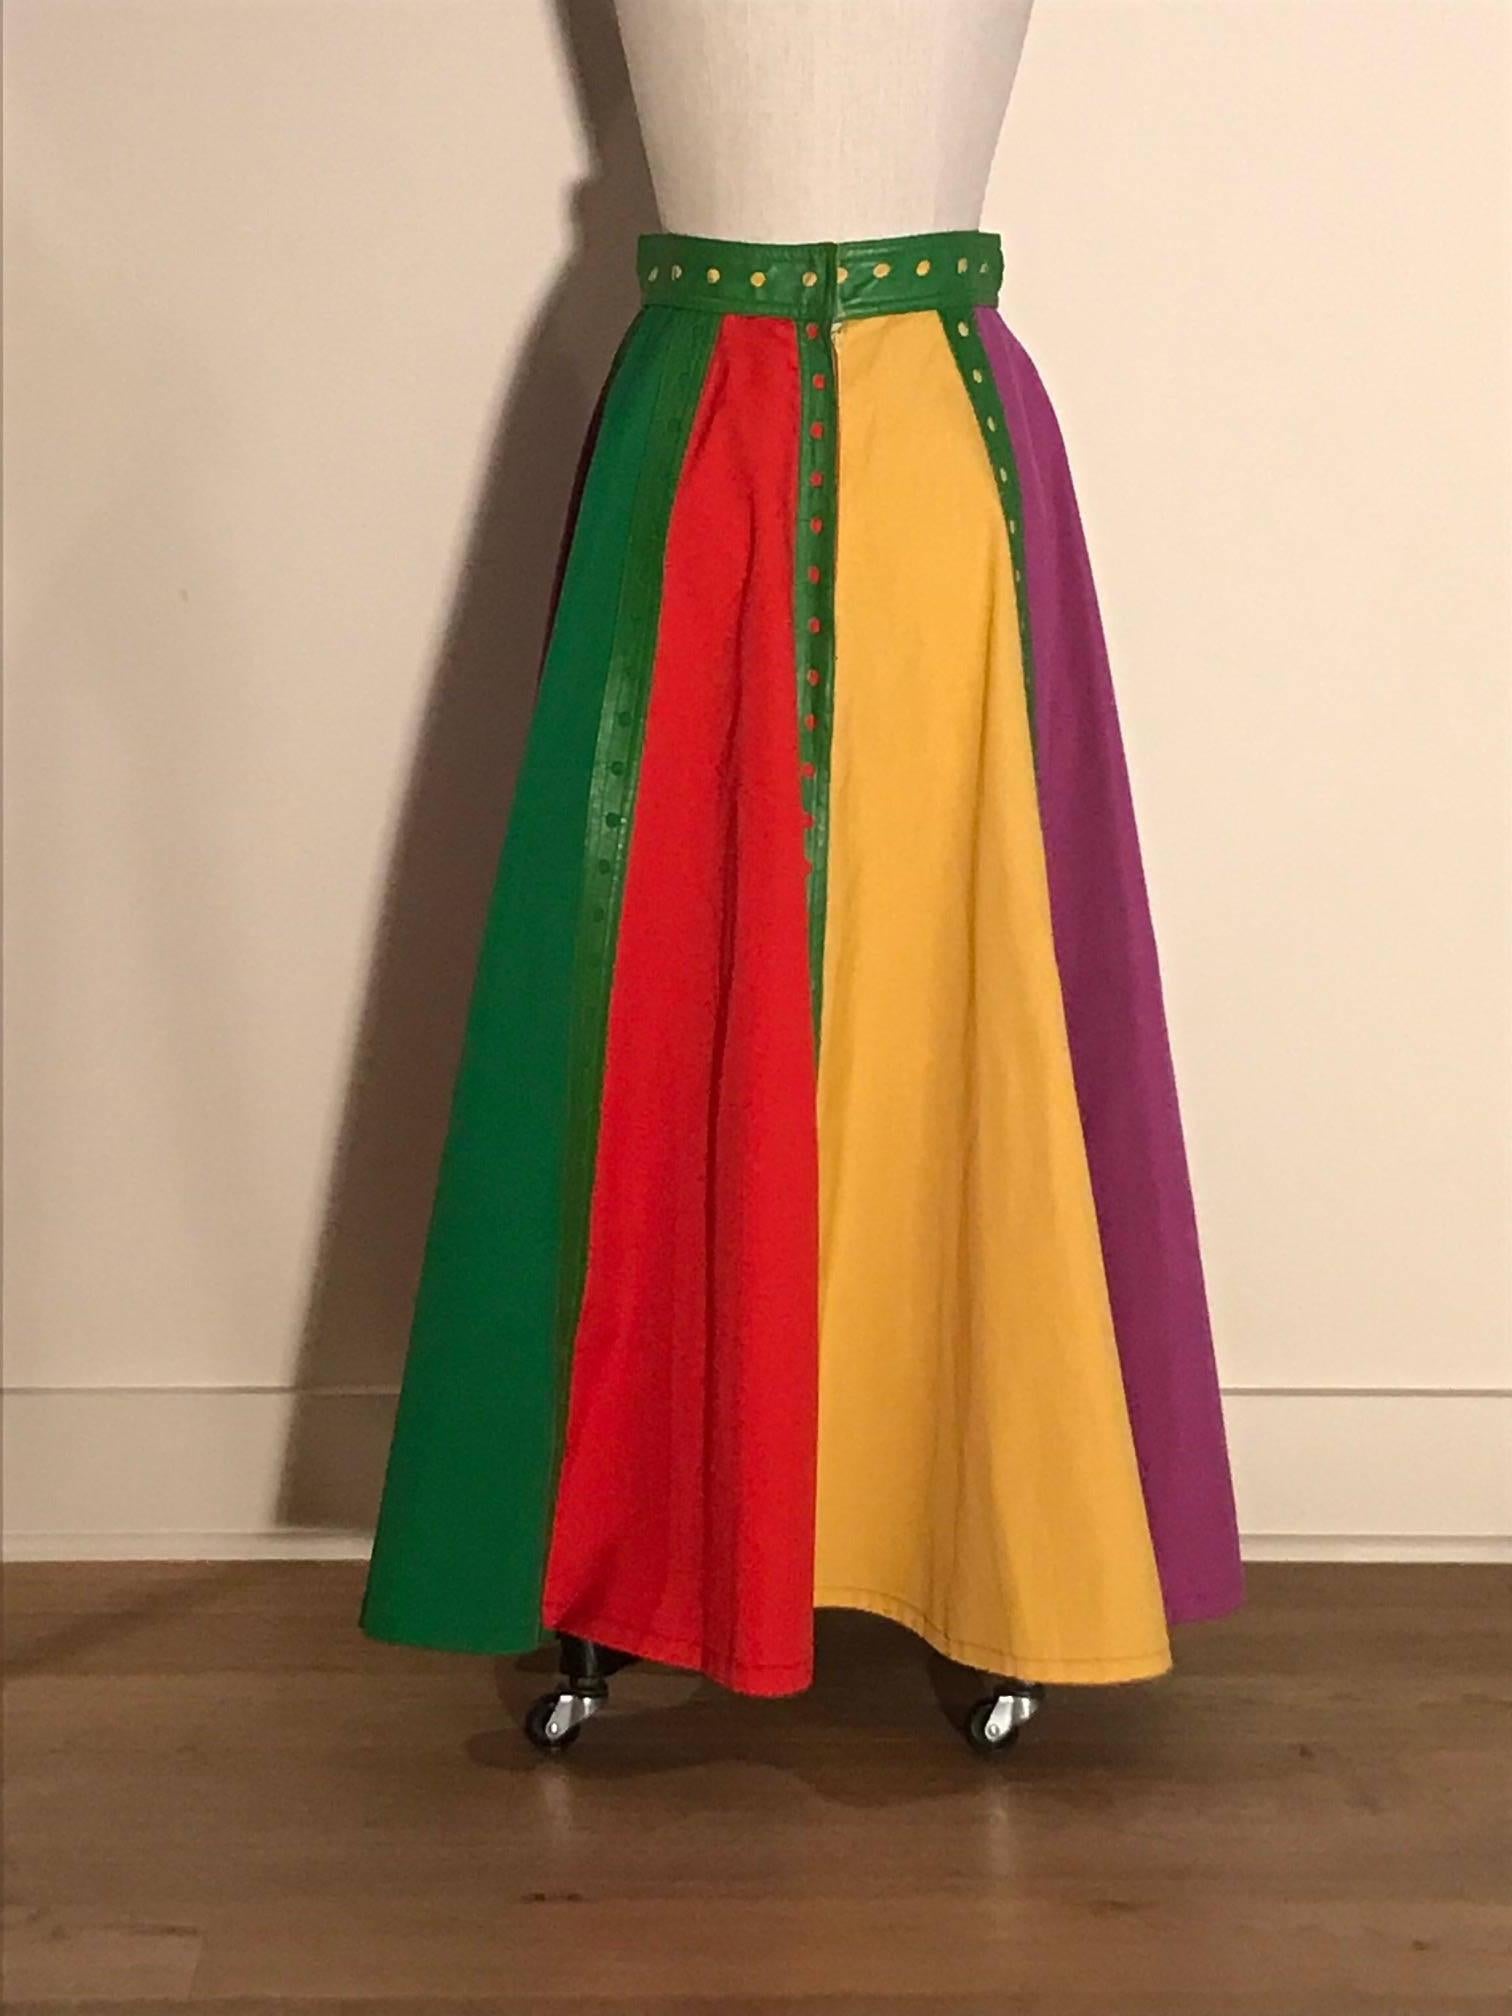 Giorgio Sant'Angelo 1970s Green Leather Trim Colorblock Maxi Skirt Long In Excellent Condition For Sale In San Francisco, CA